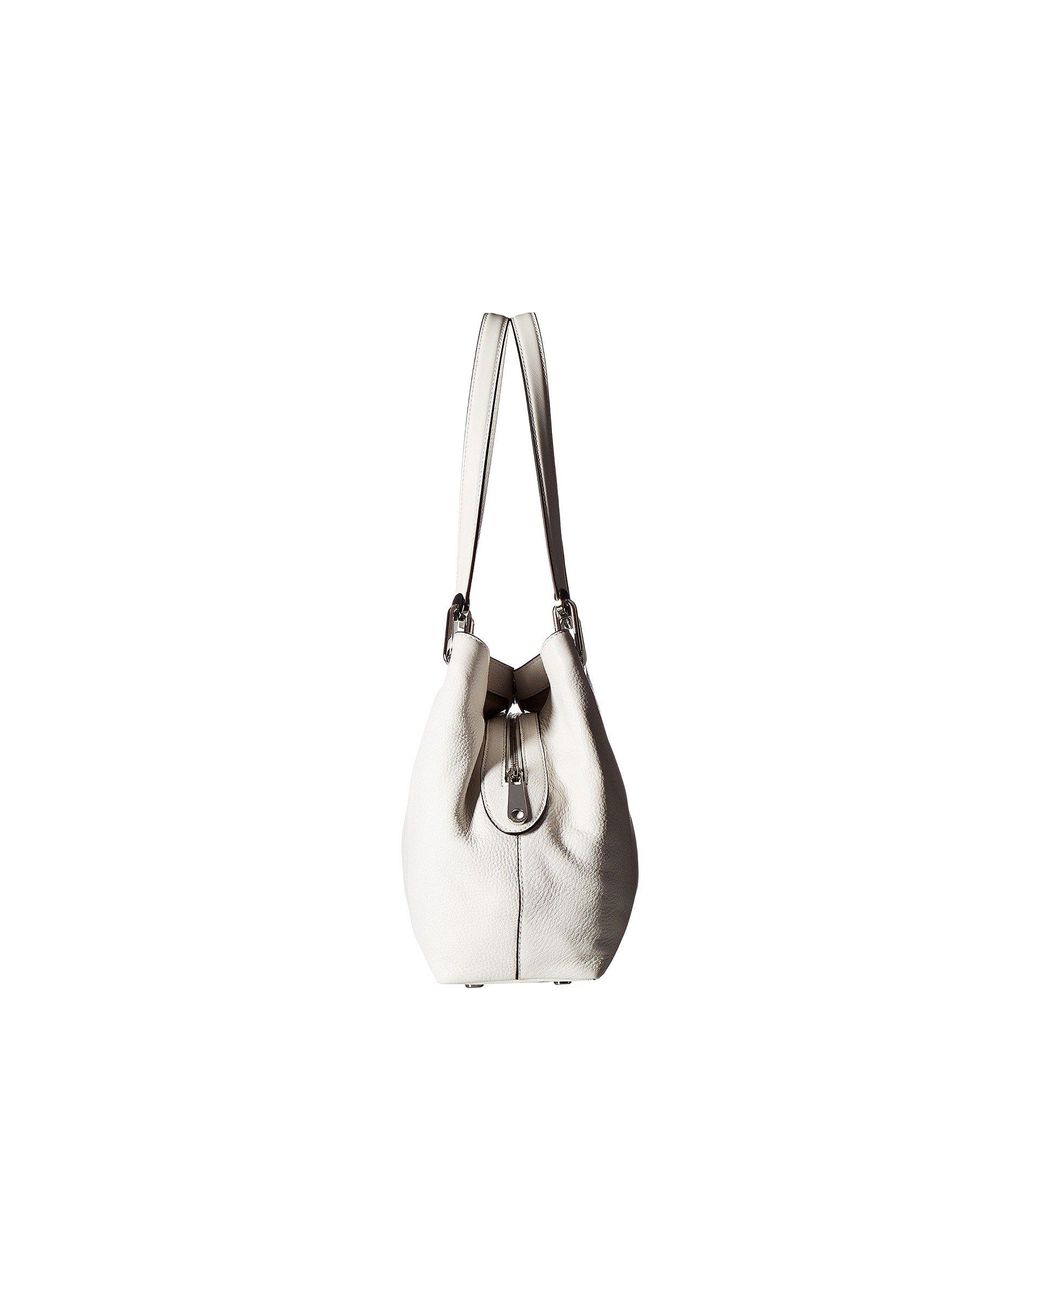 MICHAEL Michael Kors Raven Large Pebbled Leather Shoulder Tote in White |  Lyst